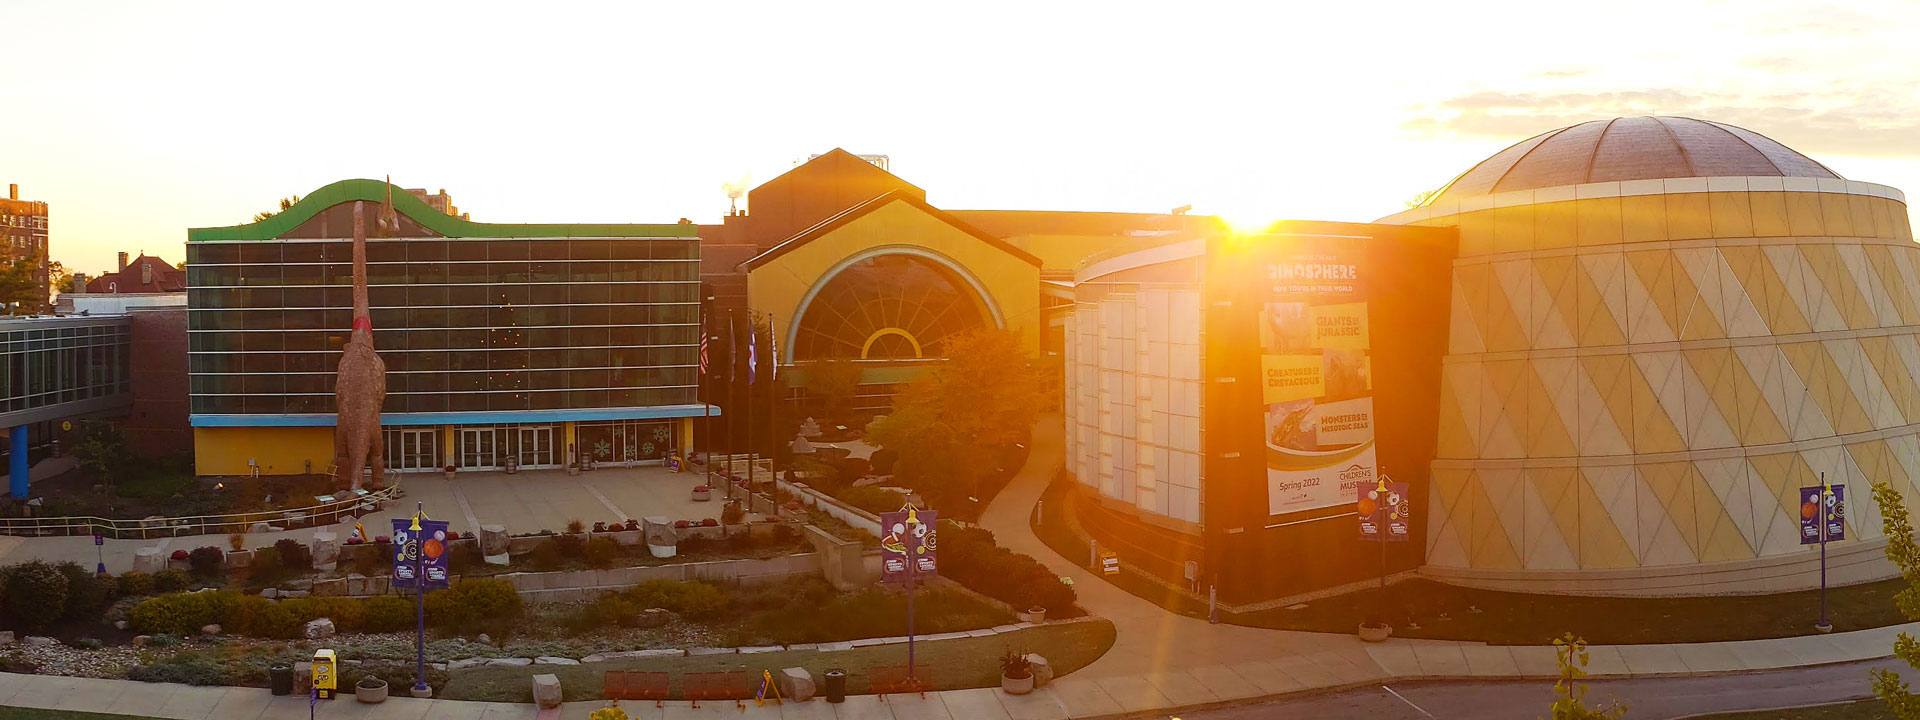 Exterior of The Children's Museum of Indianapolis with the sun rising in the background.